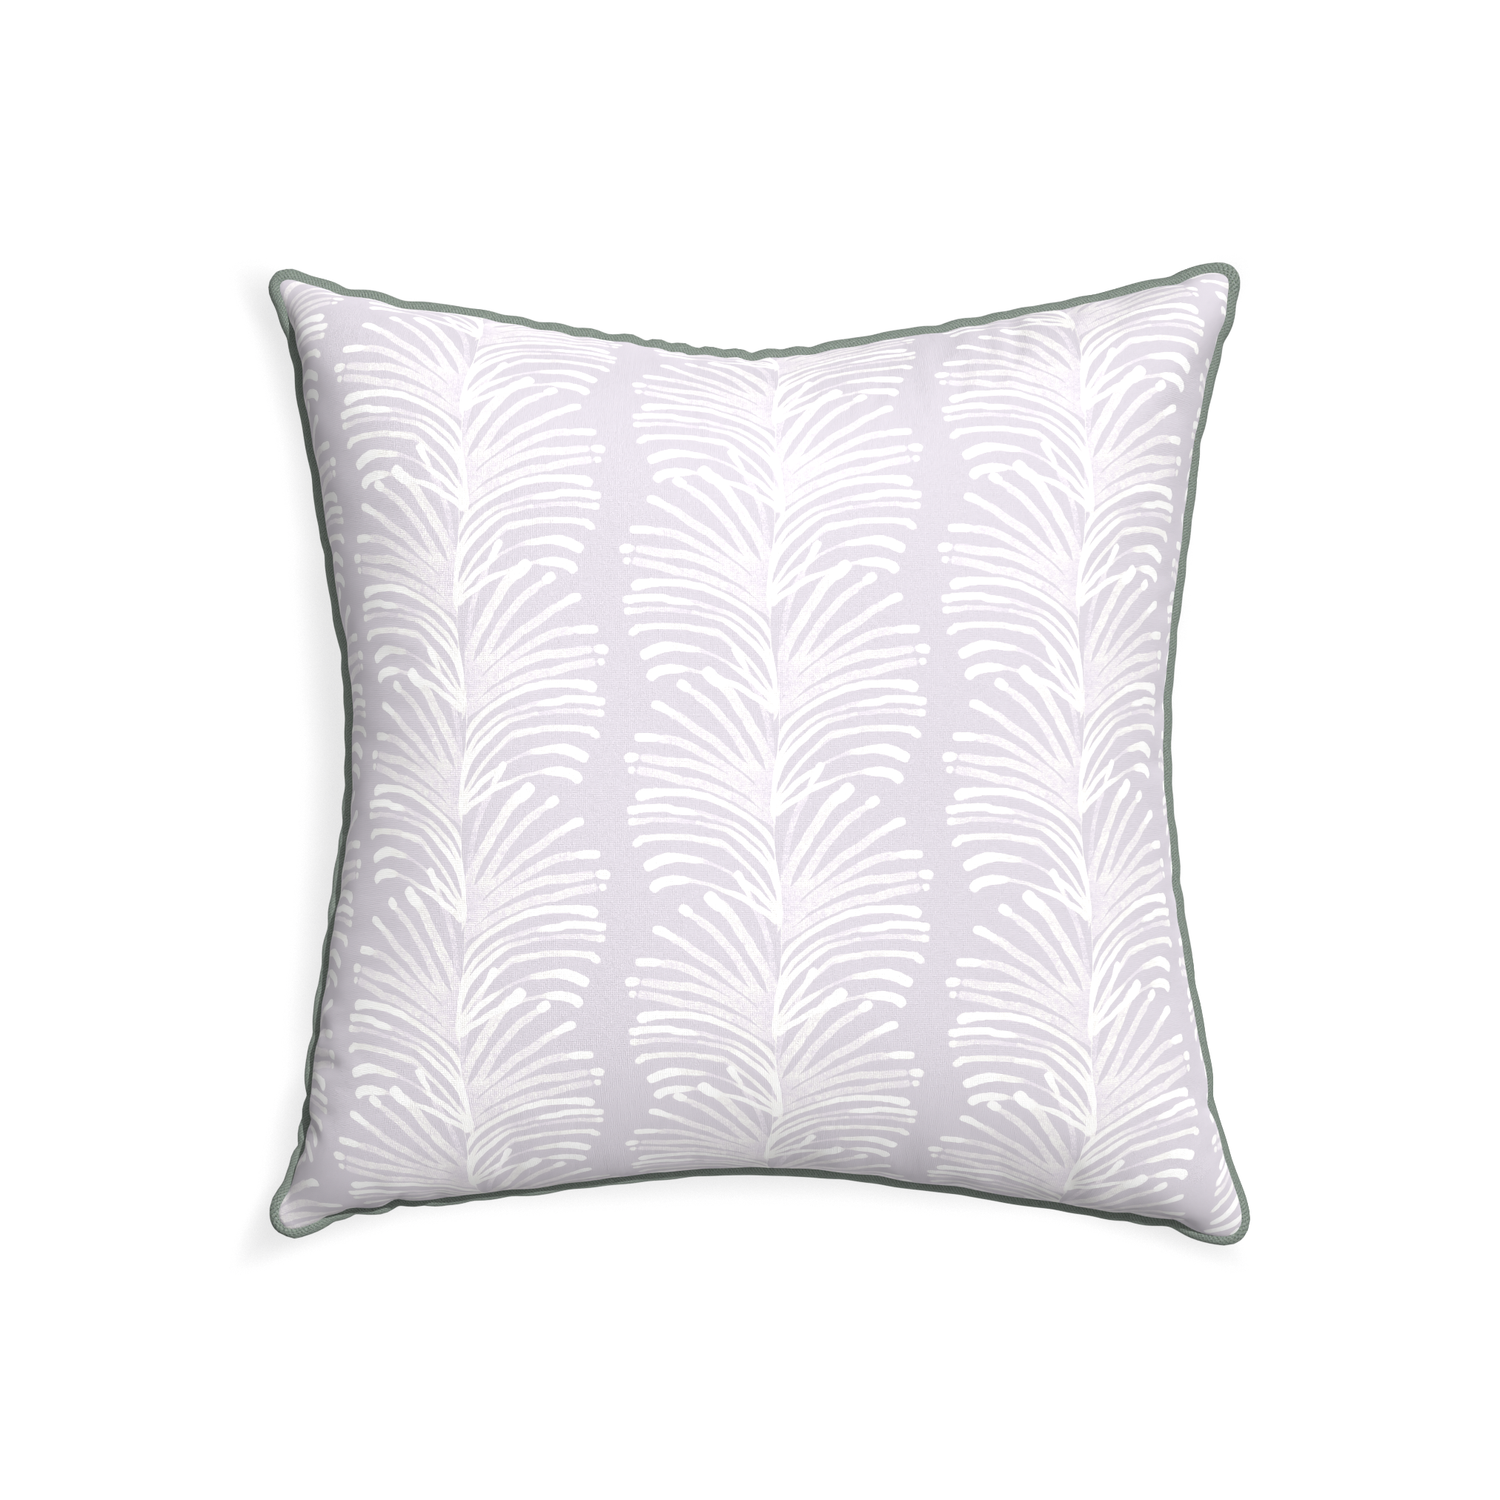 22-square emma lavender custom lavender botanical stripepillow with sage piping on white background